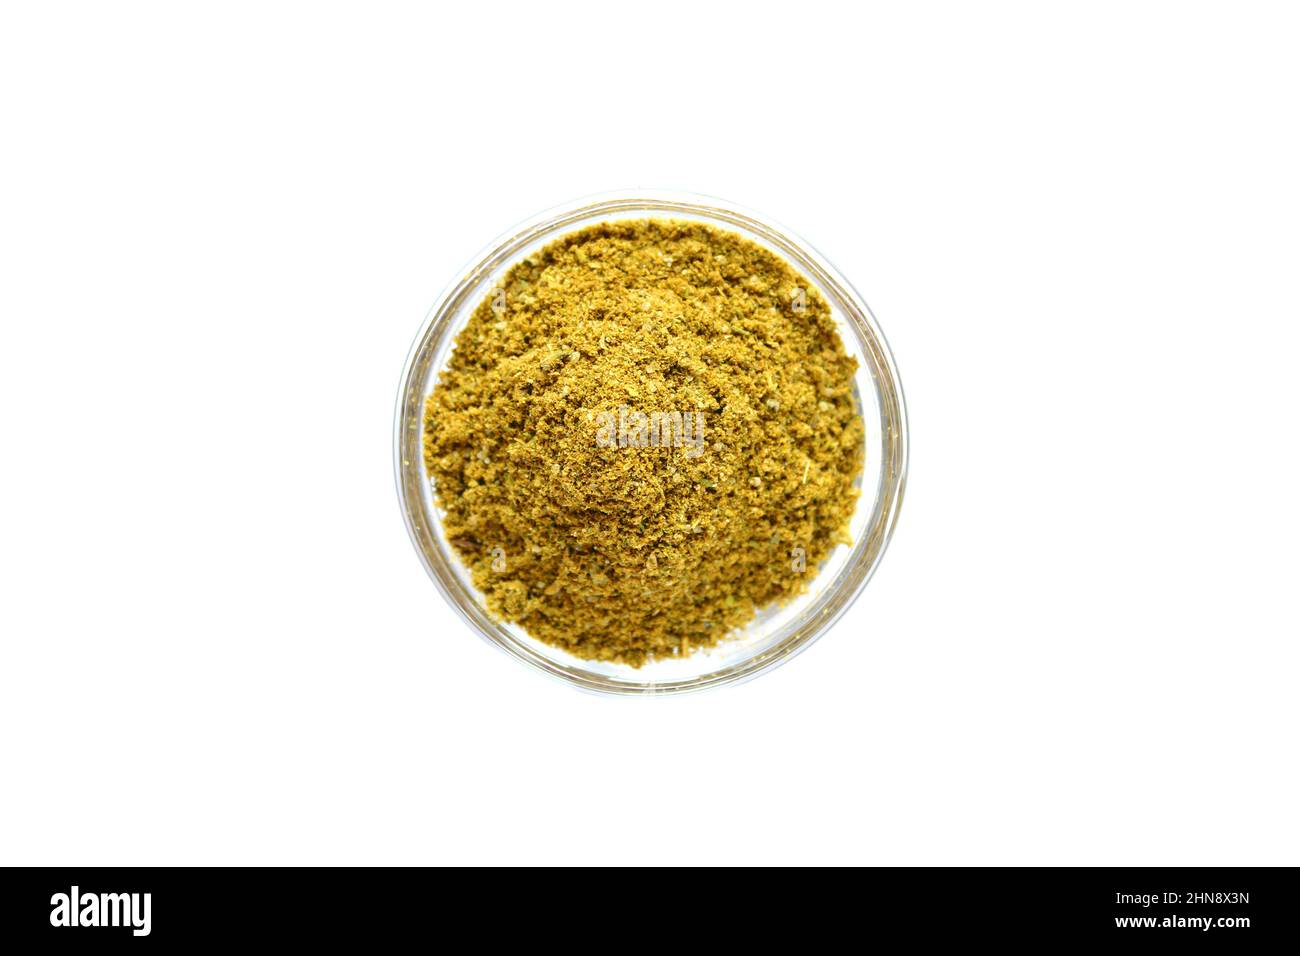 Series, spices on a white background, isolate, in different angles. Red, orange, bright suneli hops. Top view close-up. Stock Photo